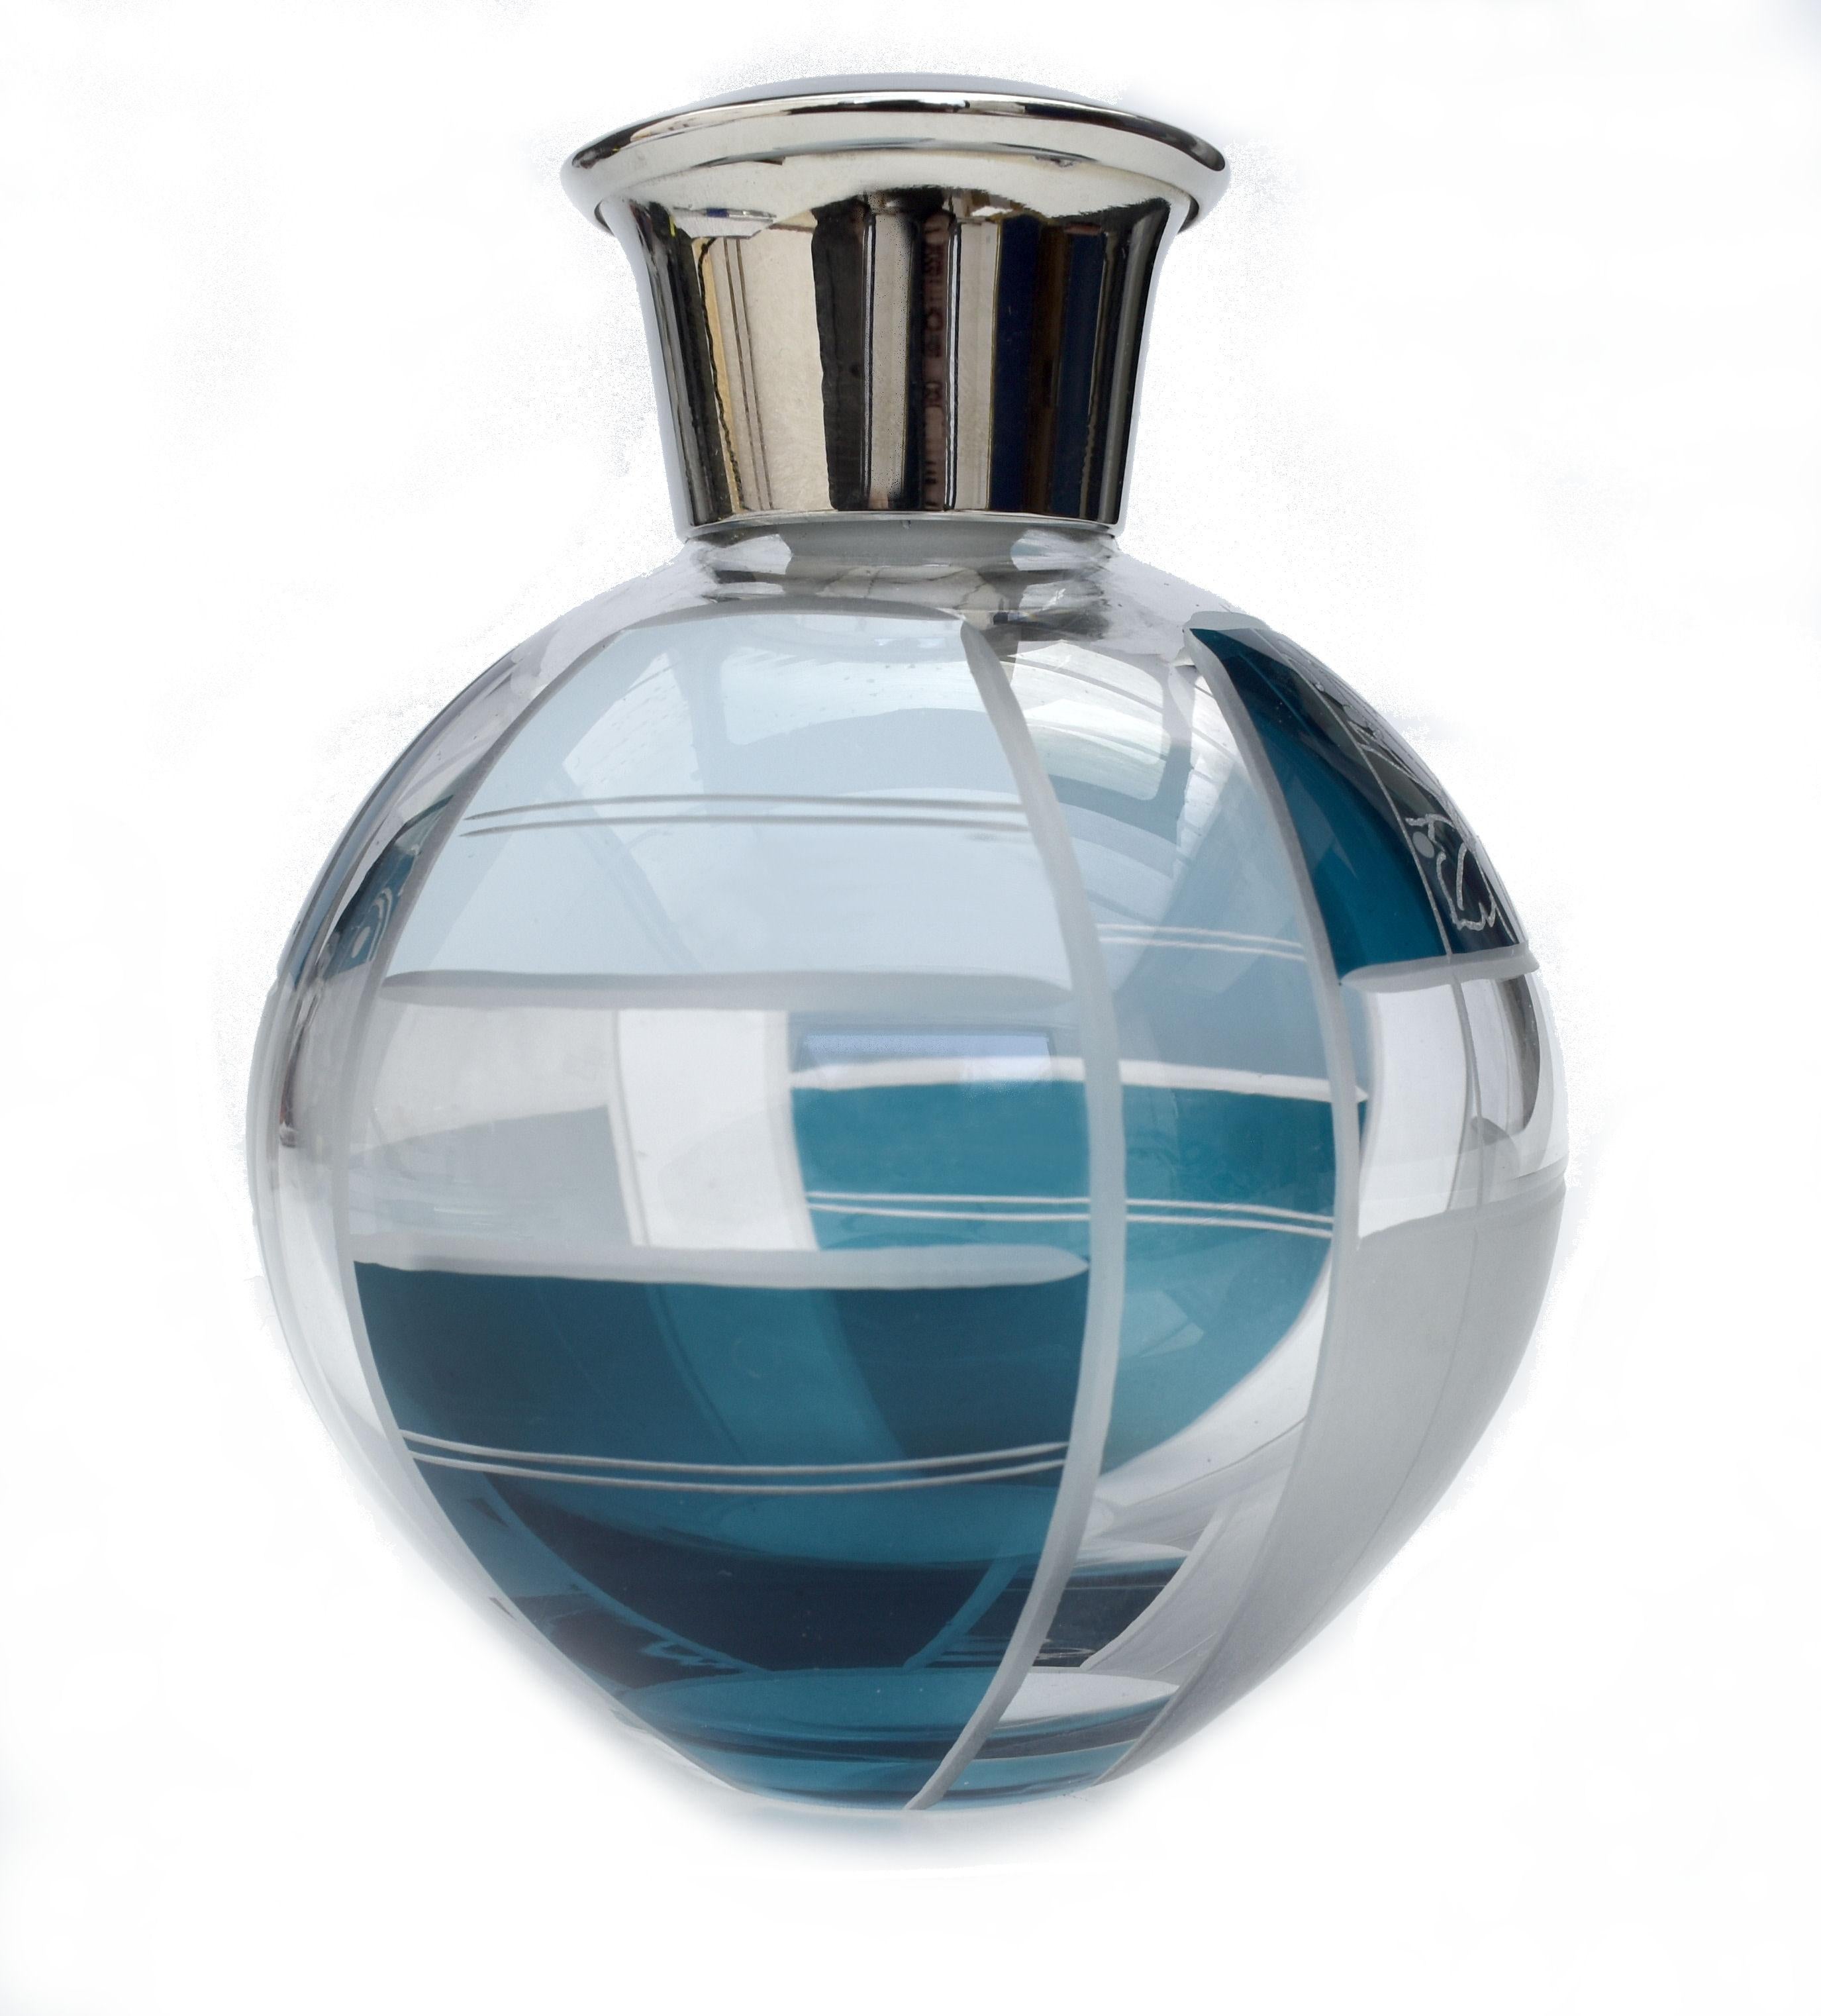 1930s Art Deco perfume bottle by Karl Palda and absolutely exquisite, every angle and side has a different design. We really can't sing the praises of this enough, if you want something beautiful in your life then this is for you! Made from glass